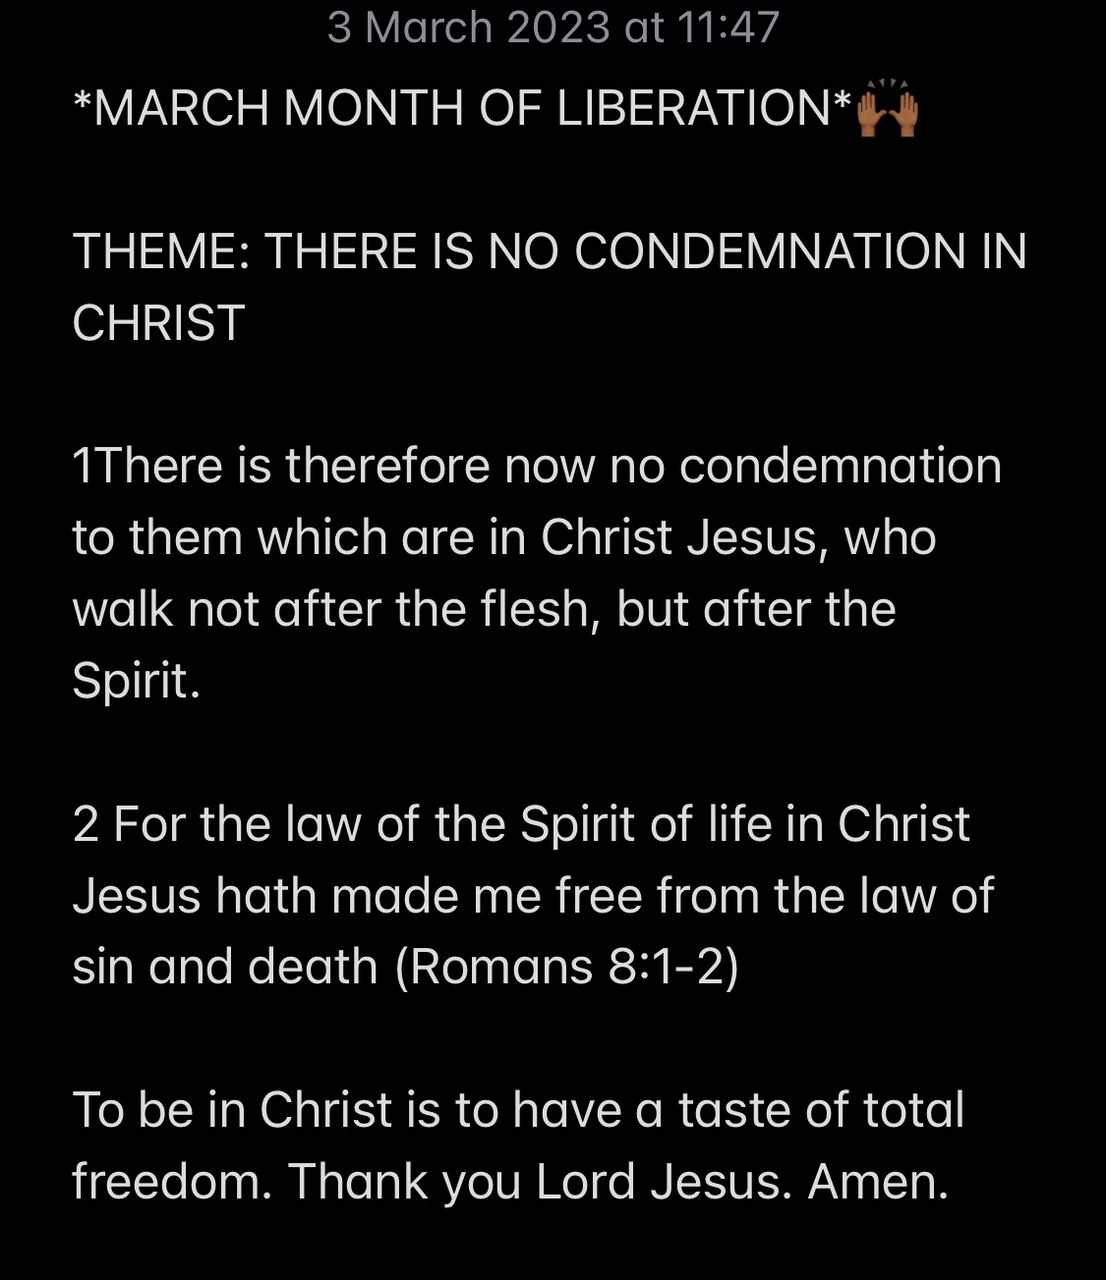 THERE IS NO CONDEMNATION IN CHRIST